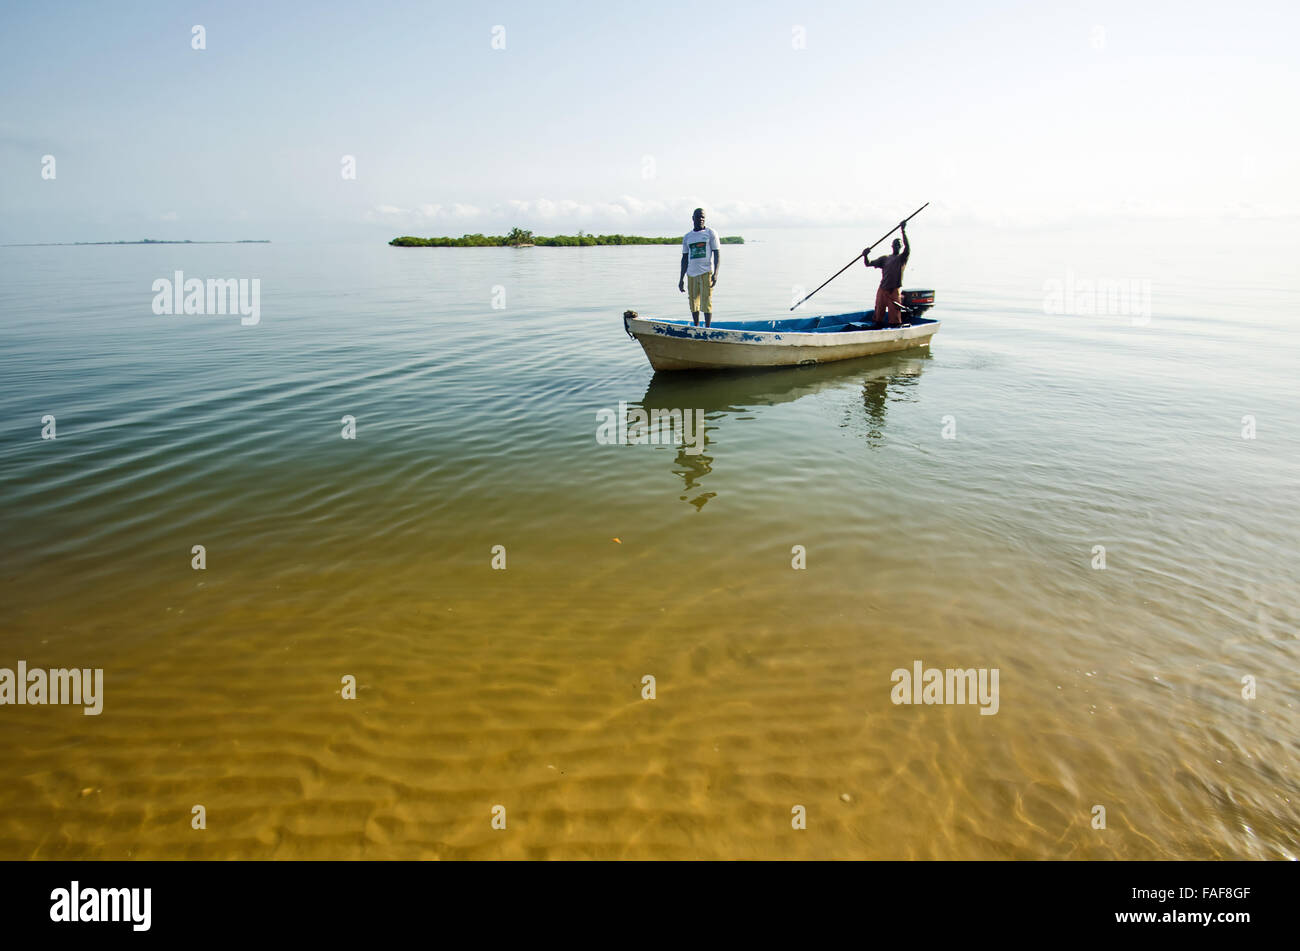 A small boat approaches Yele, in the Turtle Islands, Sierra Leone. Stock Photo